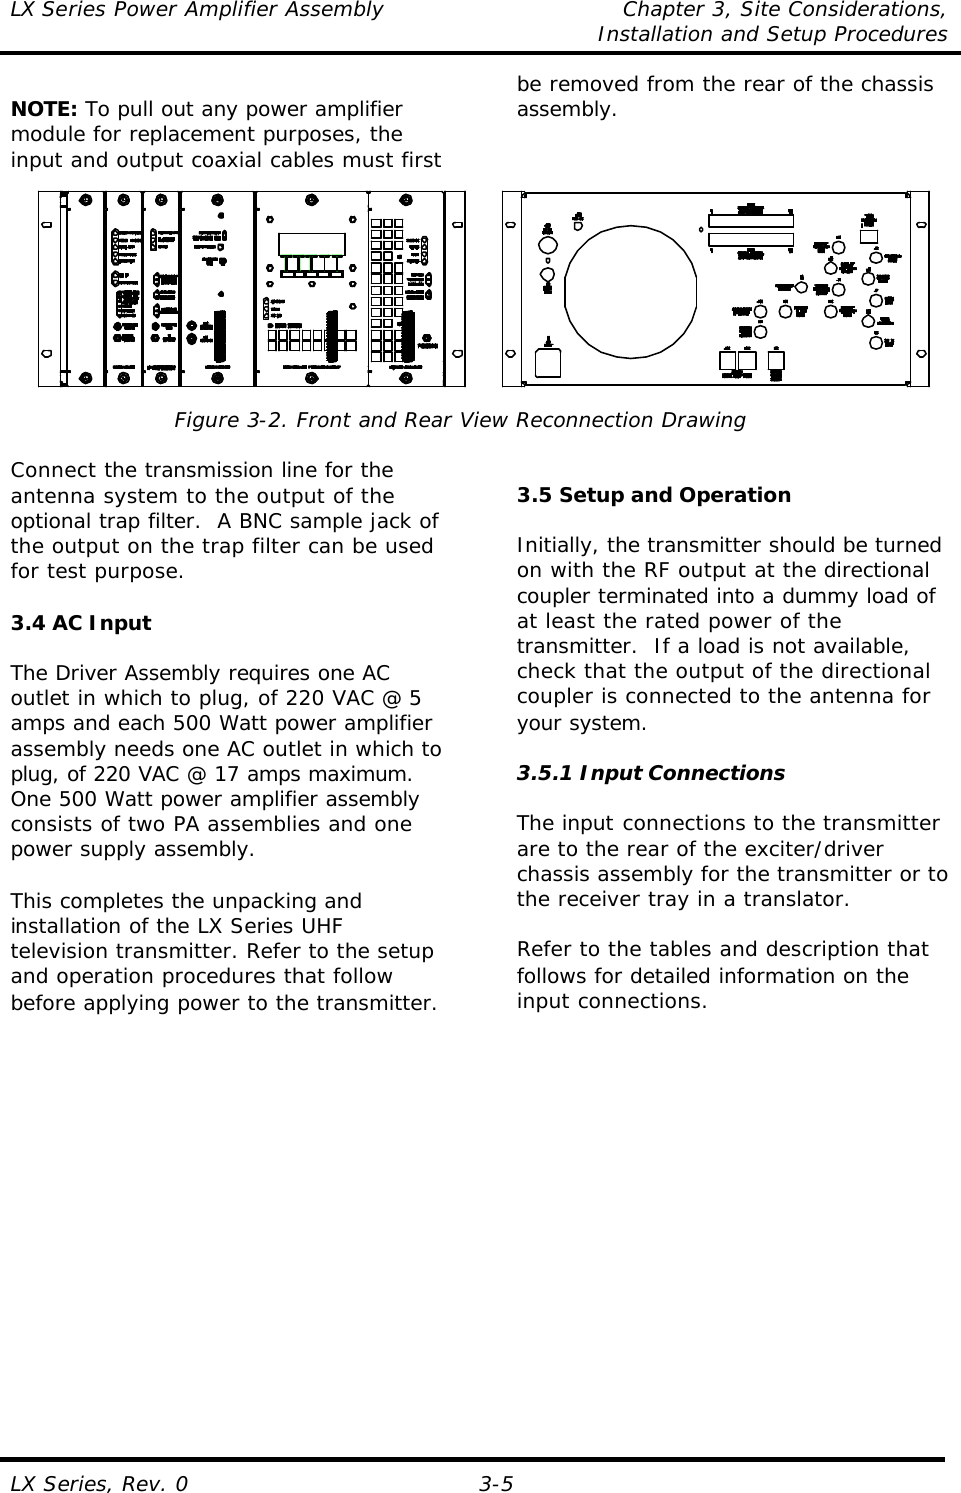 LX Series Power Amplifier Assembly Chapter 3, Site Considerations,   Installation and Setup Procedures LX Series, Rev. 0 3-5  NOTE: To pull out any power amplifier module for replacement purposes, the input and output coaxial cables must first be removed from the rear of the chassis assembly.   Figure 3-2. Front and Rear View Reconnection Drawing  Connect the transmission line for the antenna system to the output of the optional trap filter.  A BNC sample jack of the output on the trap filter can be used for test purpose.  3.4 AC Input  The Driver Assembly requires one AC outlet in which to plug, of 220 VAC @ 5 amps and each 500 Watt power amplifier assembly needs one AC outlet in which to plug, of 220 VAC @ 17 amps maximum.  One 500 Watt power amplifier assembly consists of two PA assemblies and one power supply assembly.  This completes the unpacking and installation of the LX Series UHF television transmitter. Refer to the setup and operation procedures that follow before applying power to the transmitter.     3.5 Setup and Operation  Initially, the transmitter should be turned on with the RF output at the directional coupler terminated into a dummy load of at least the rated power of the transmitter.  If a load is not available, check that the output of the directional coupler is connected to the antenna for your system.  3.5.1 Input Connections  The input connections to the transmitter are to the rear of the exciter/driver chassis assembly for the transmitter or to the receiver tray in a translator.  Refer to the tables and description that follows for detailed information on the input connections.  